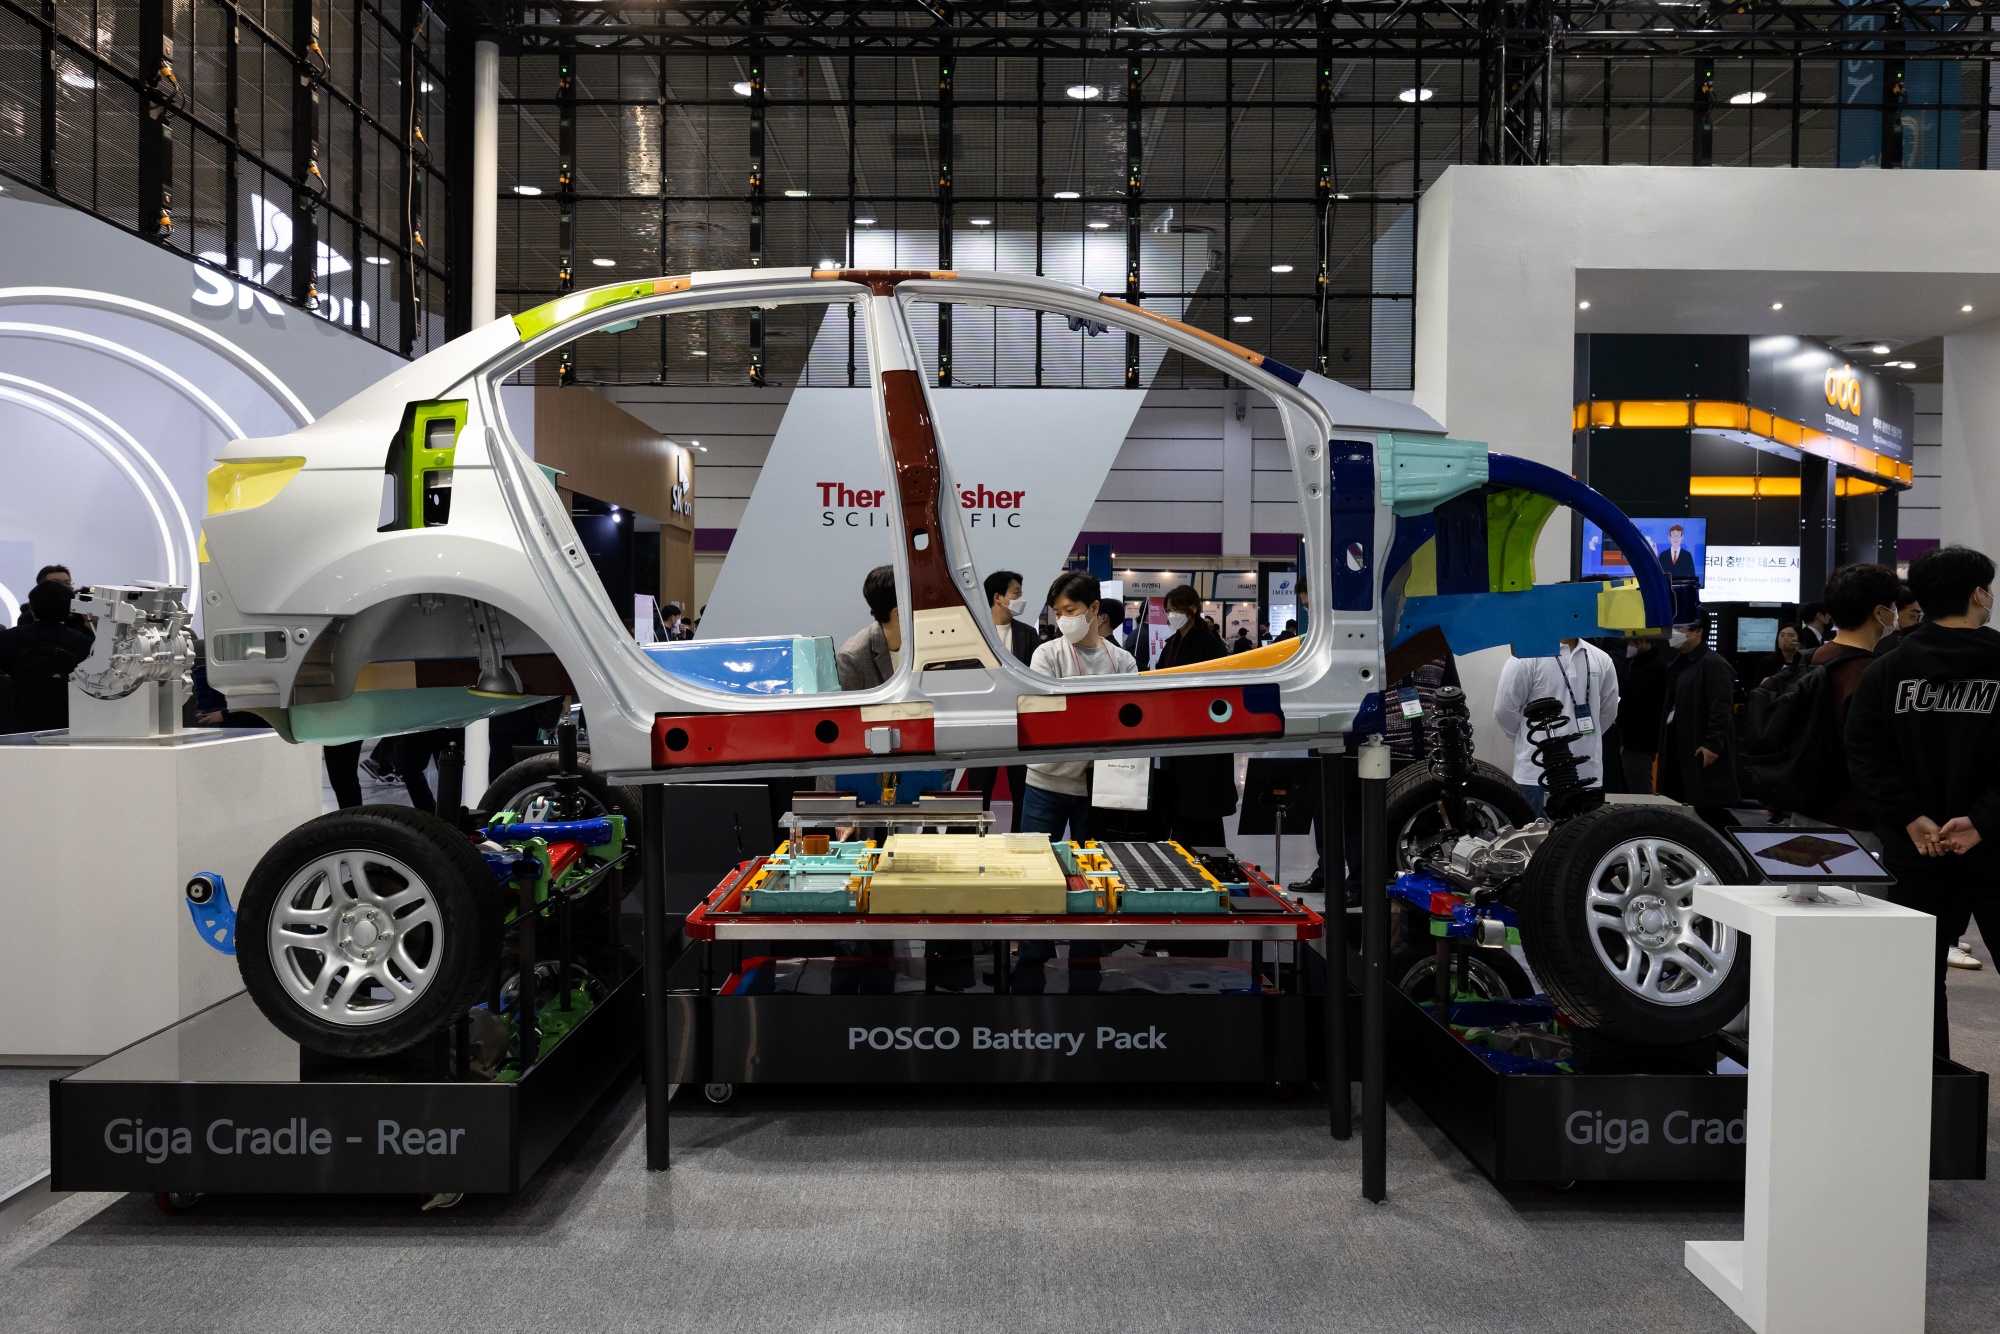 A Posco Chemical Co. battery pack for electric vehicle displayed at the InterBattery exhibition in Seoul, earlier in&nbsp;March